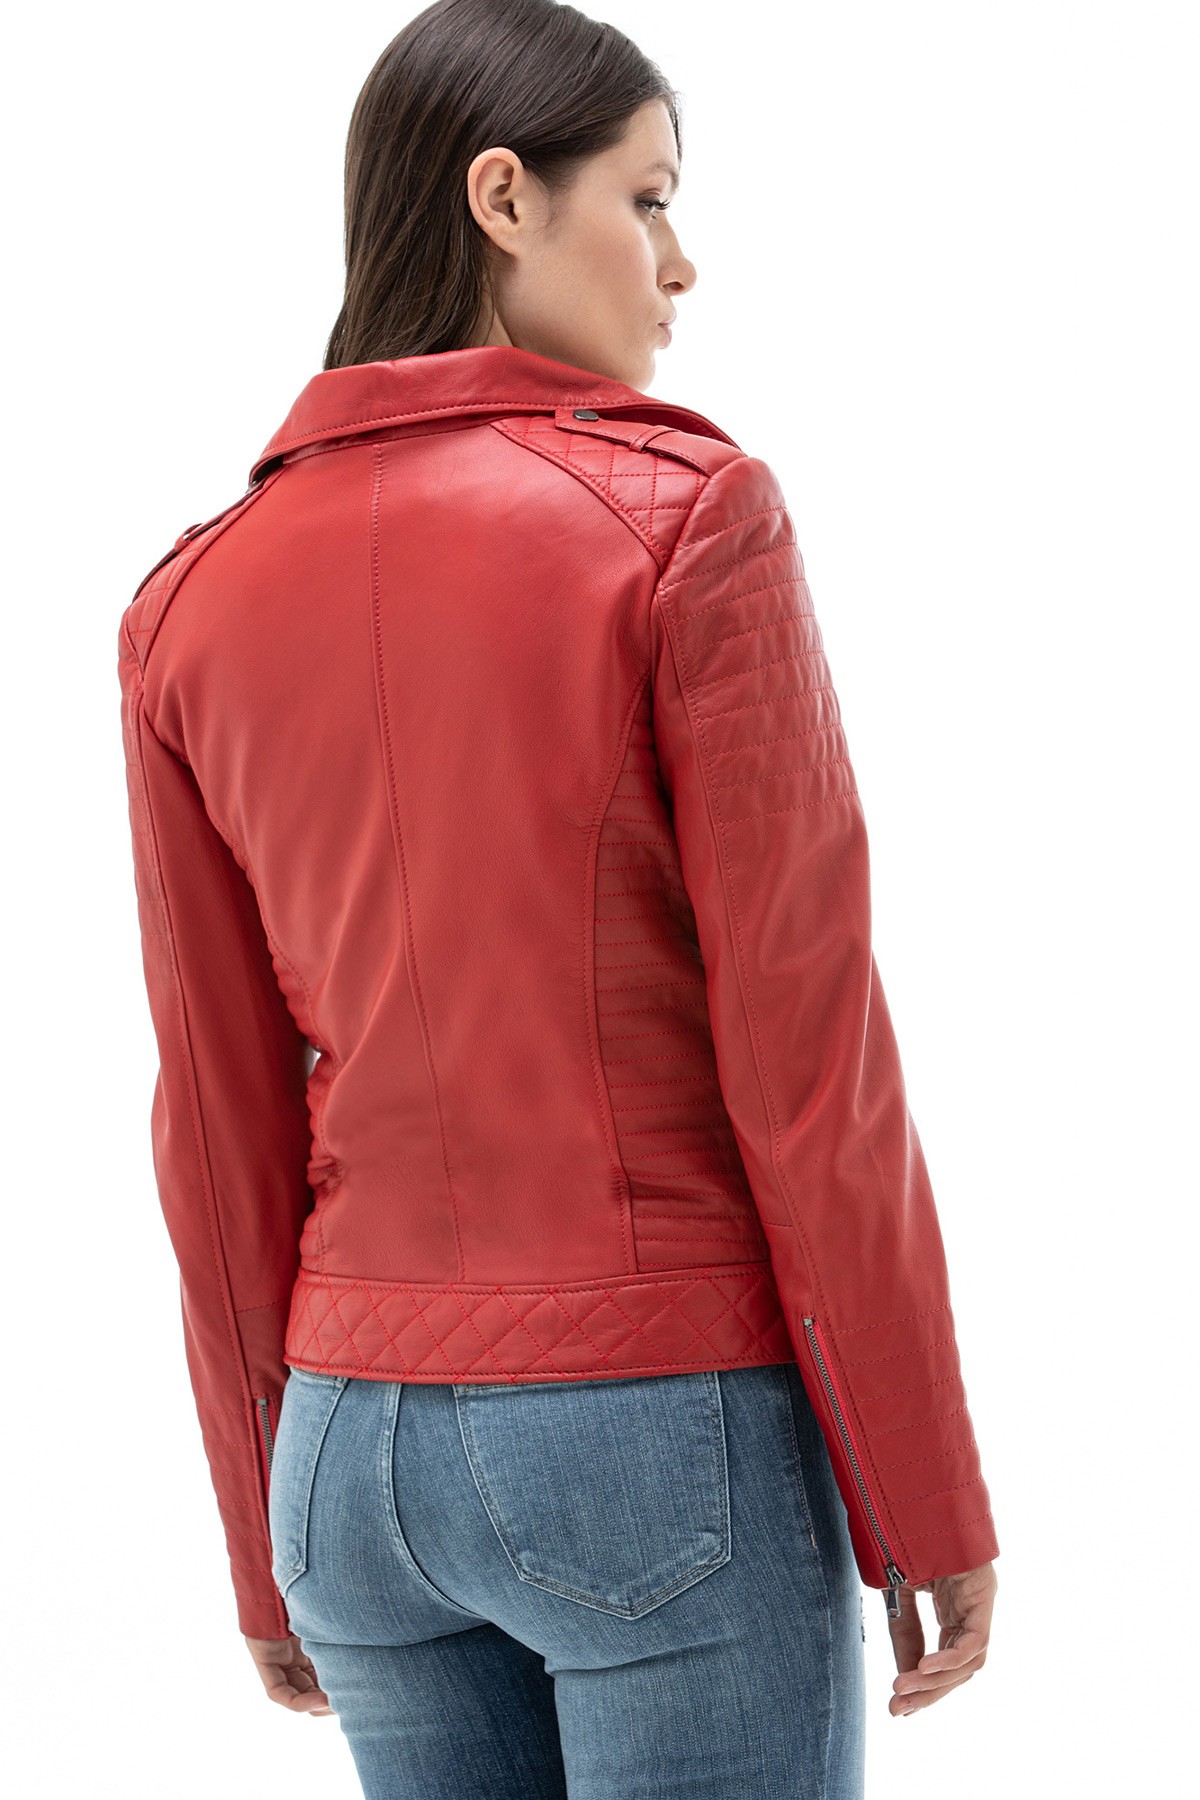 Women S 100 Real Red Leather Biker Style Jacket